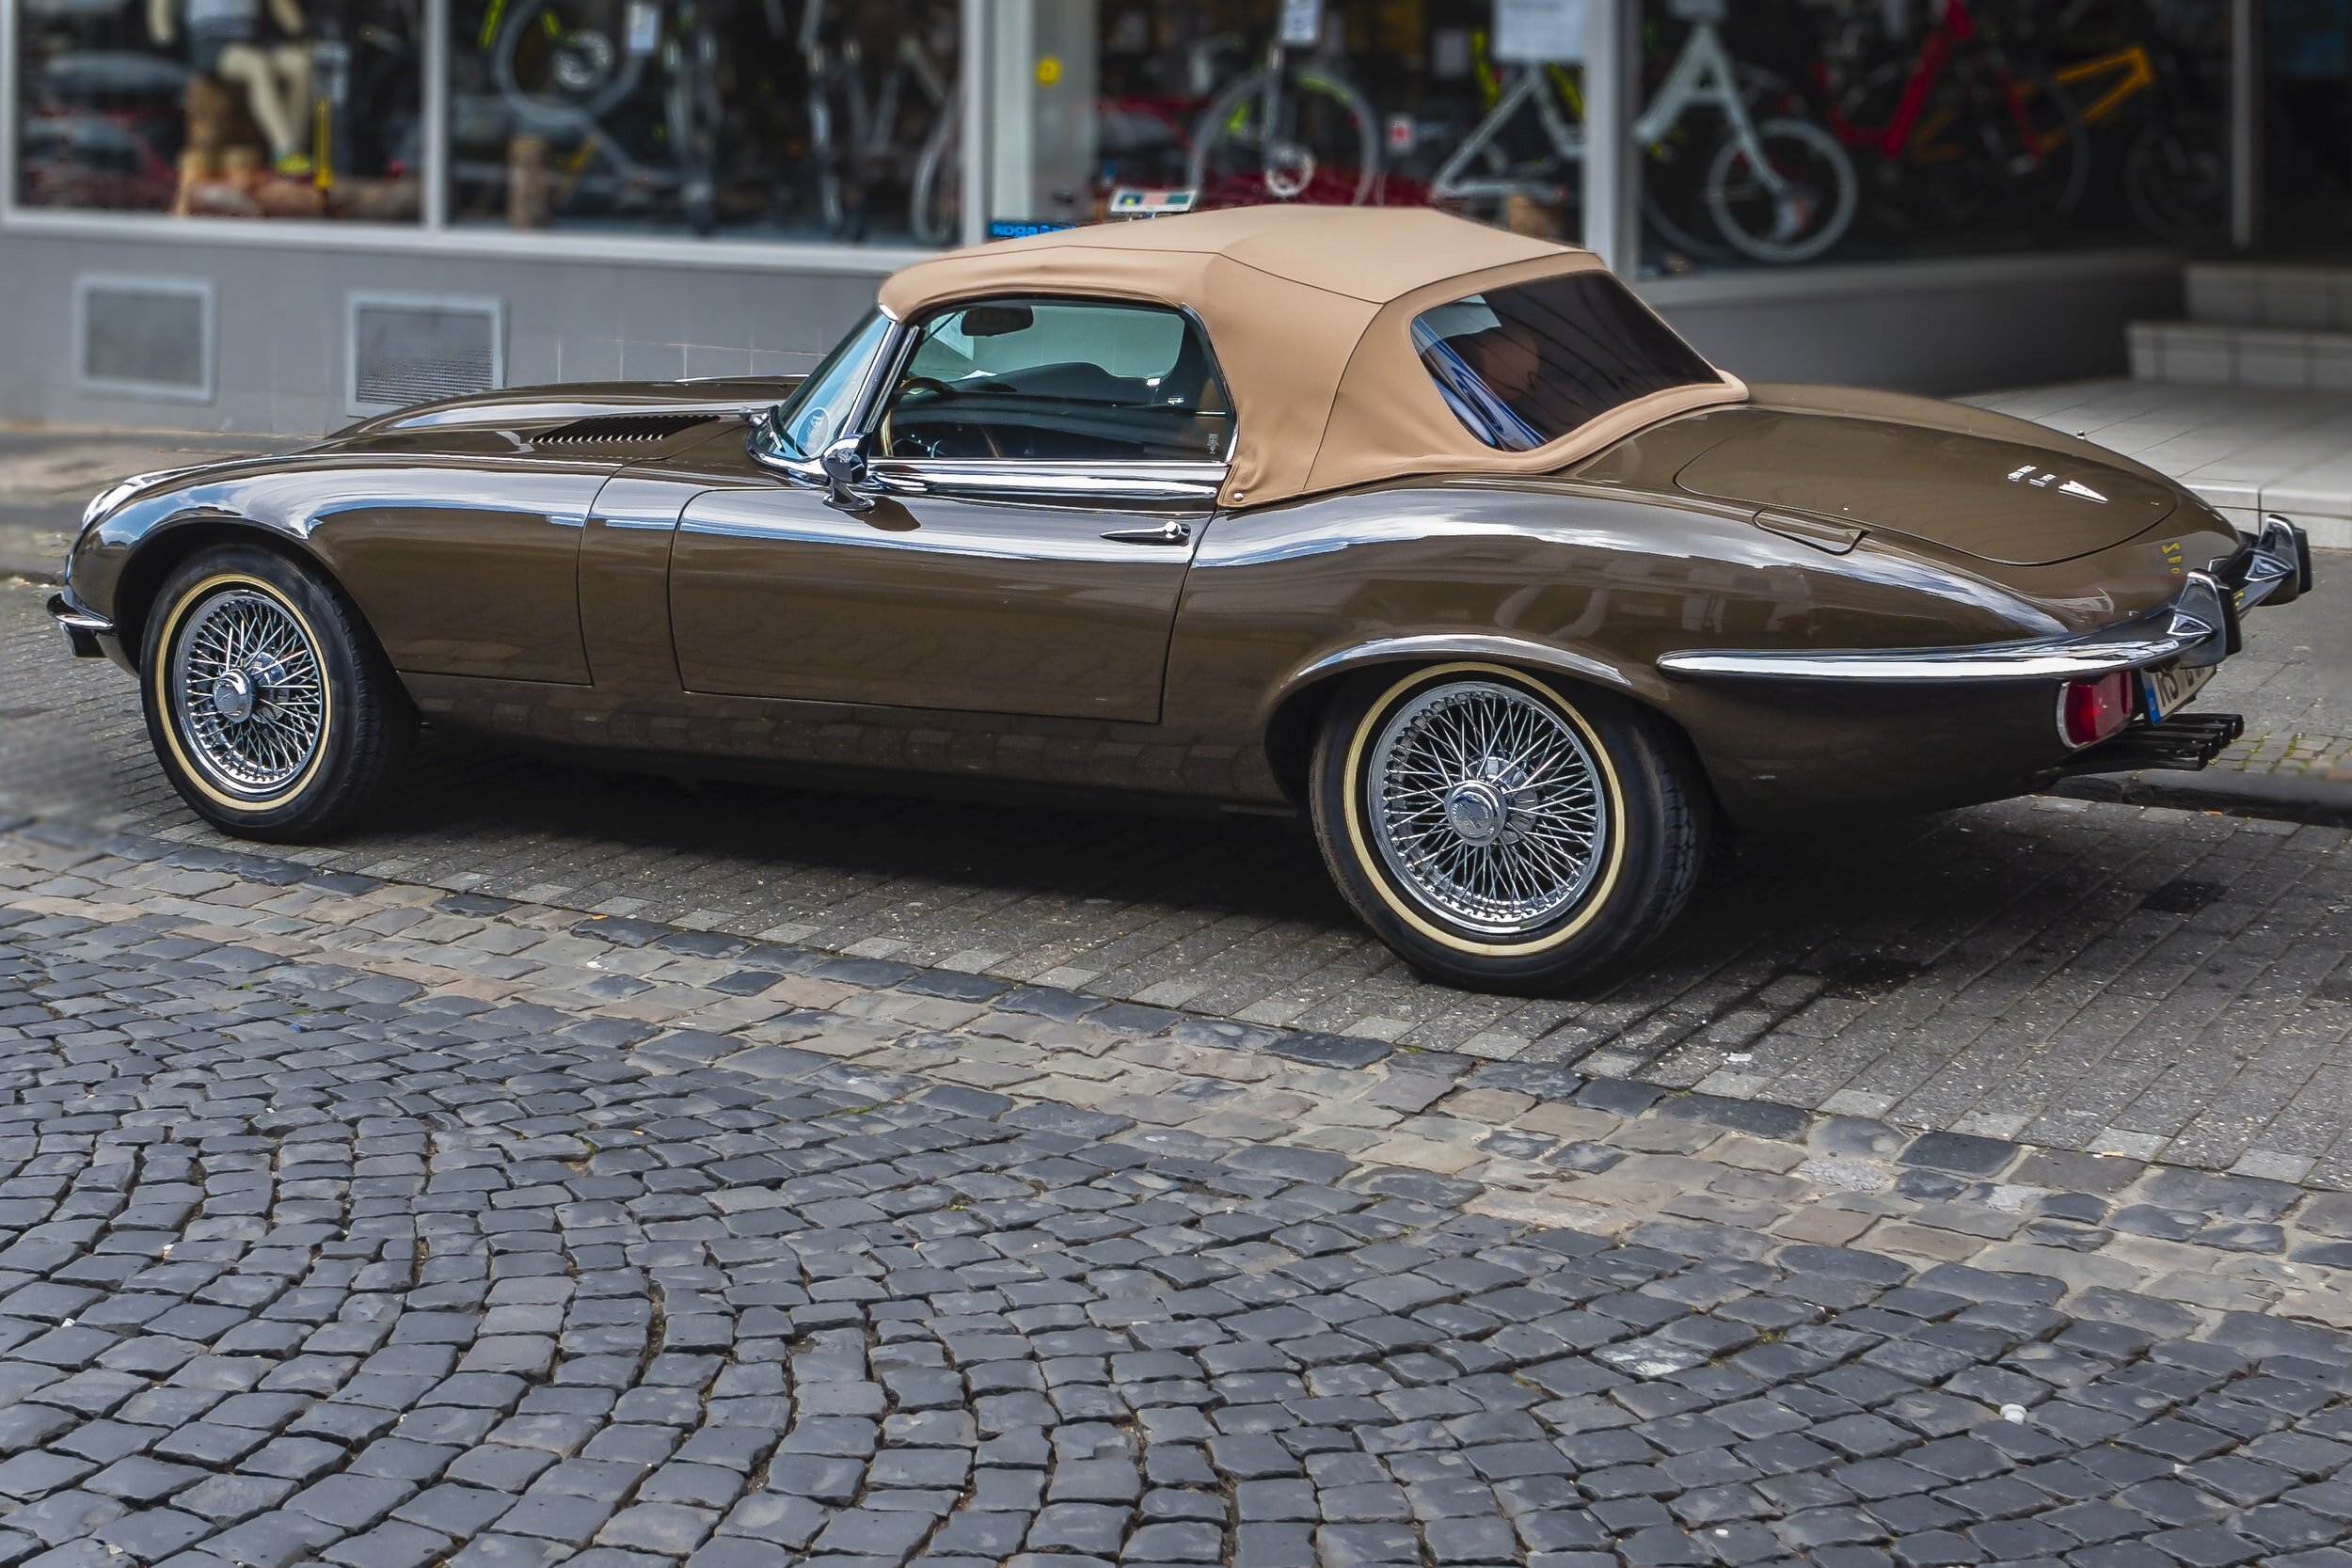 1966 Jaguar E-Type Review: Power and Poise Worthy of an Icon